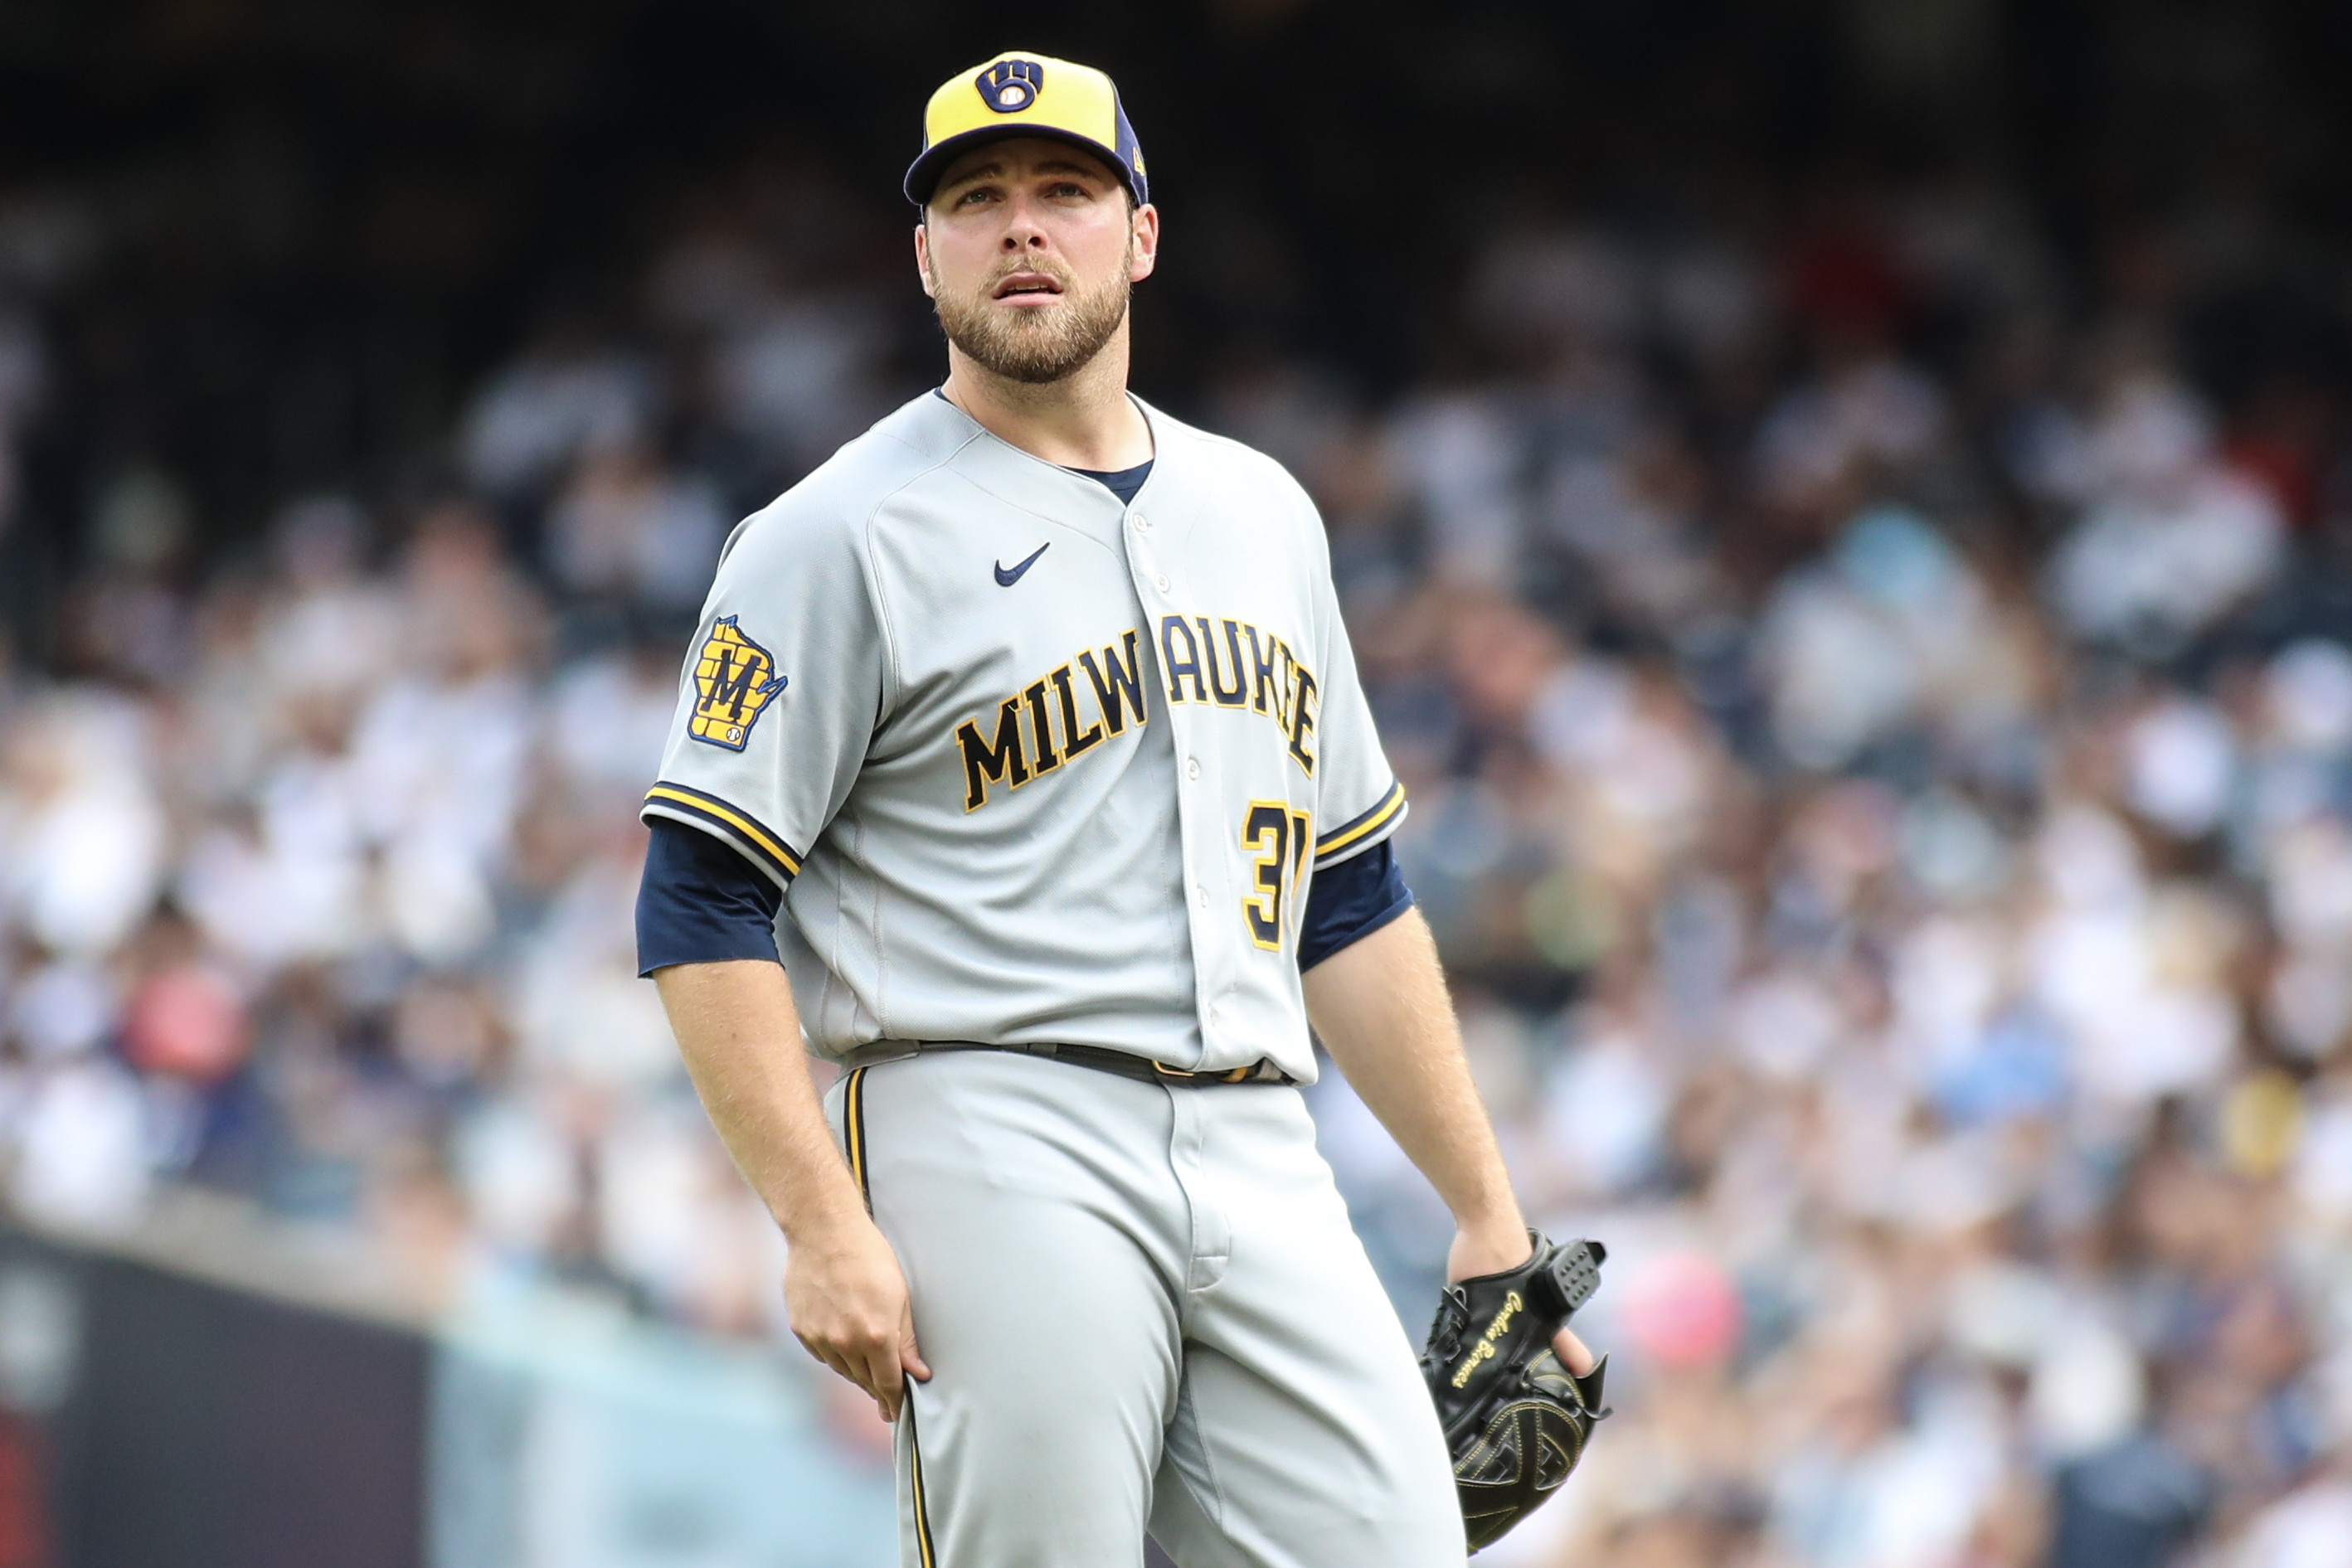 Brewers' Burnes, Hader combine for MLB record 9th no-hitter - The